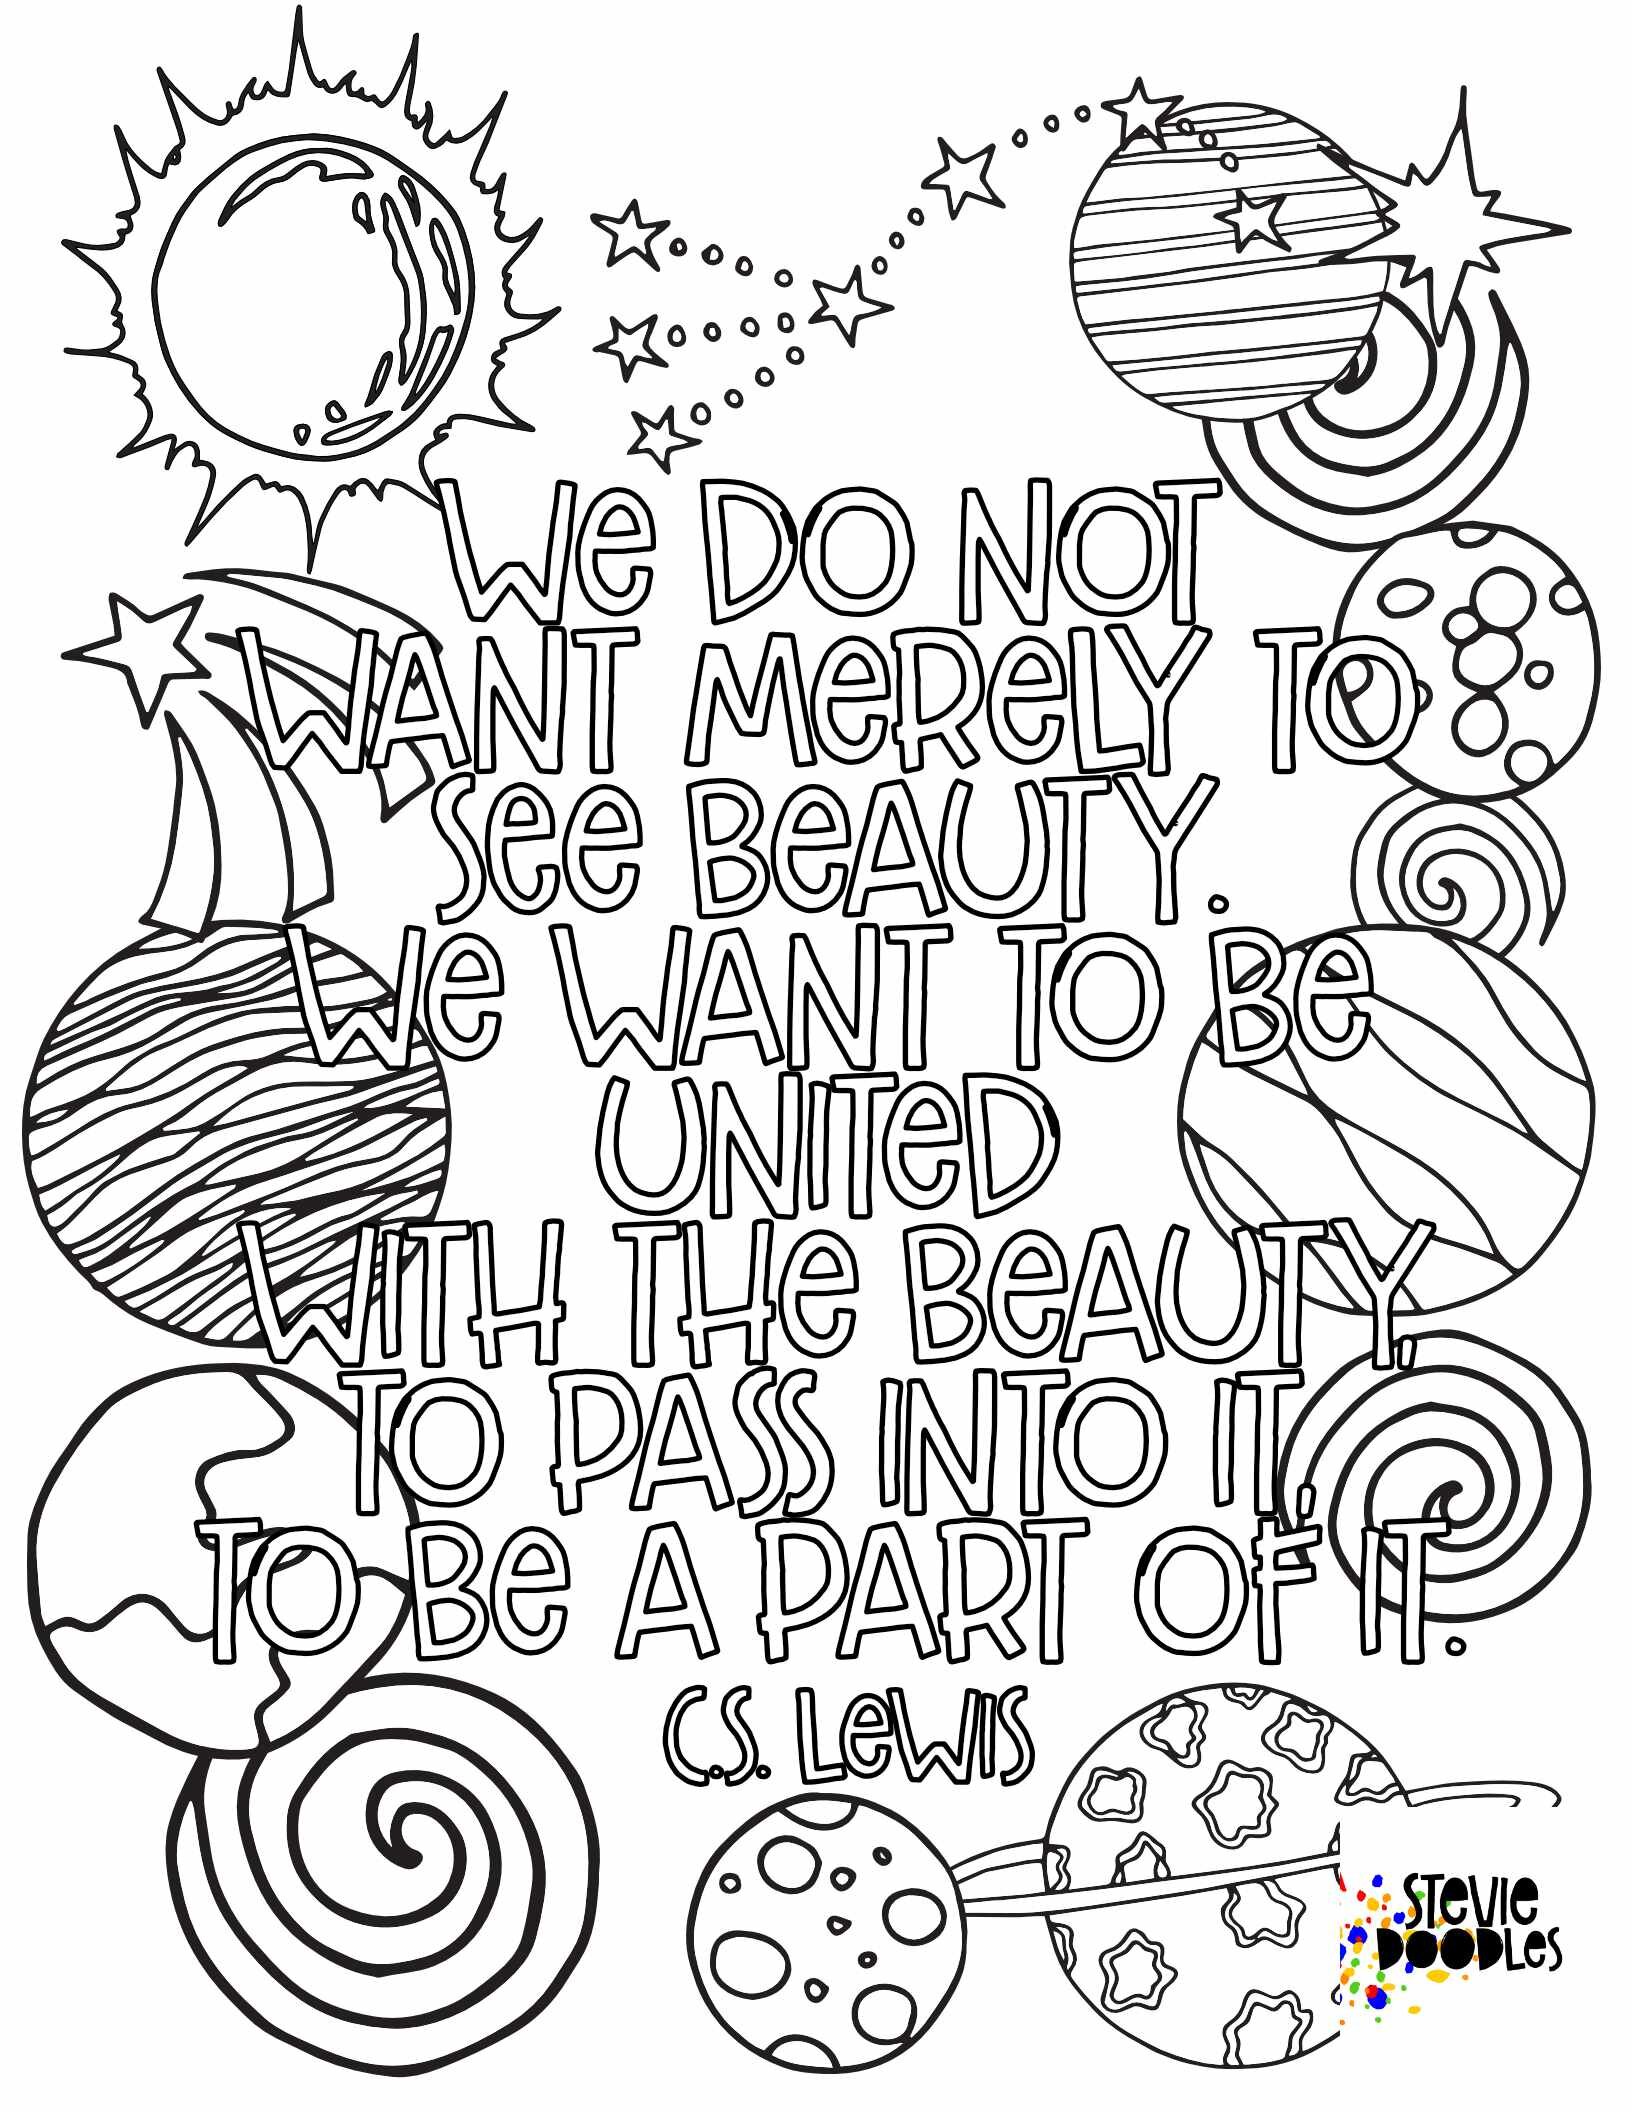 5 Free C.S. Lewis Quote Coloring Pages — Stevie Doodles